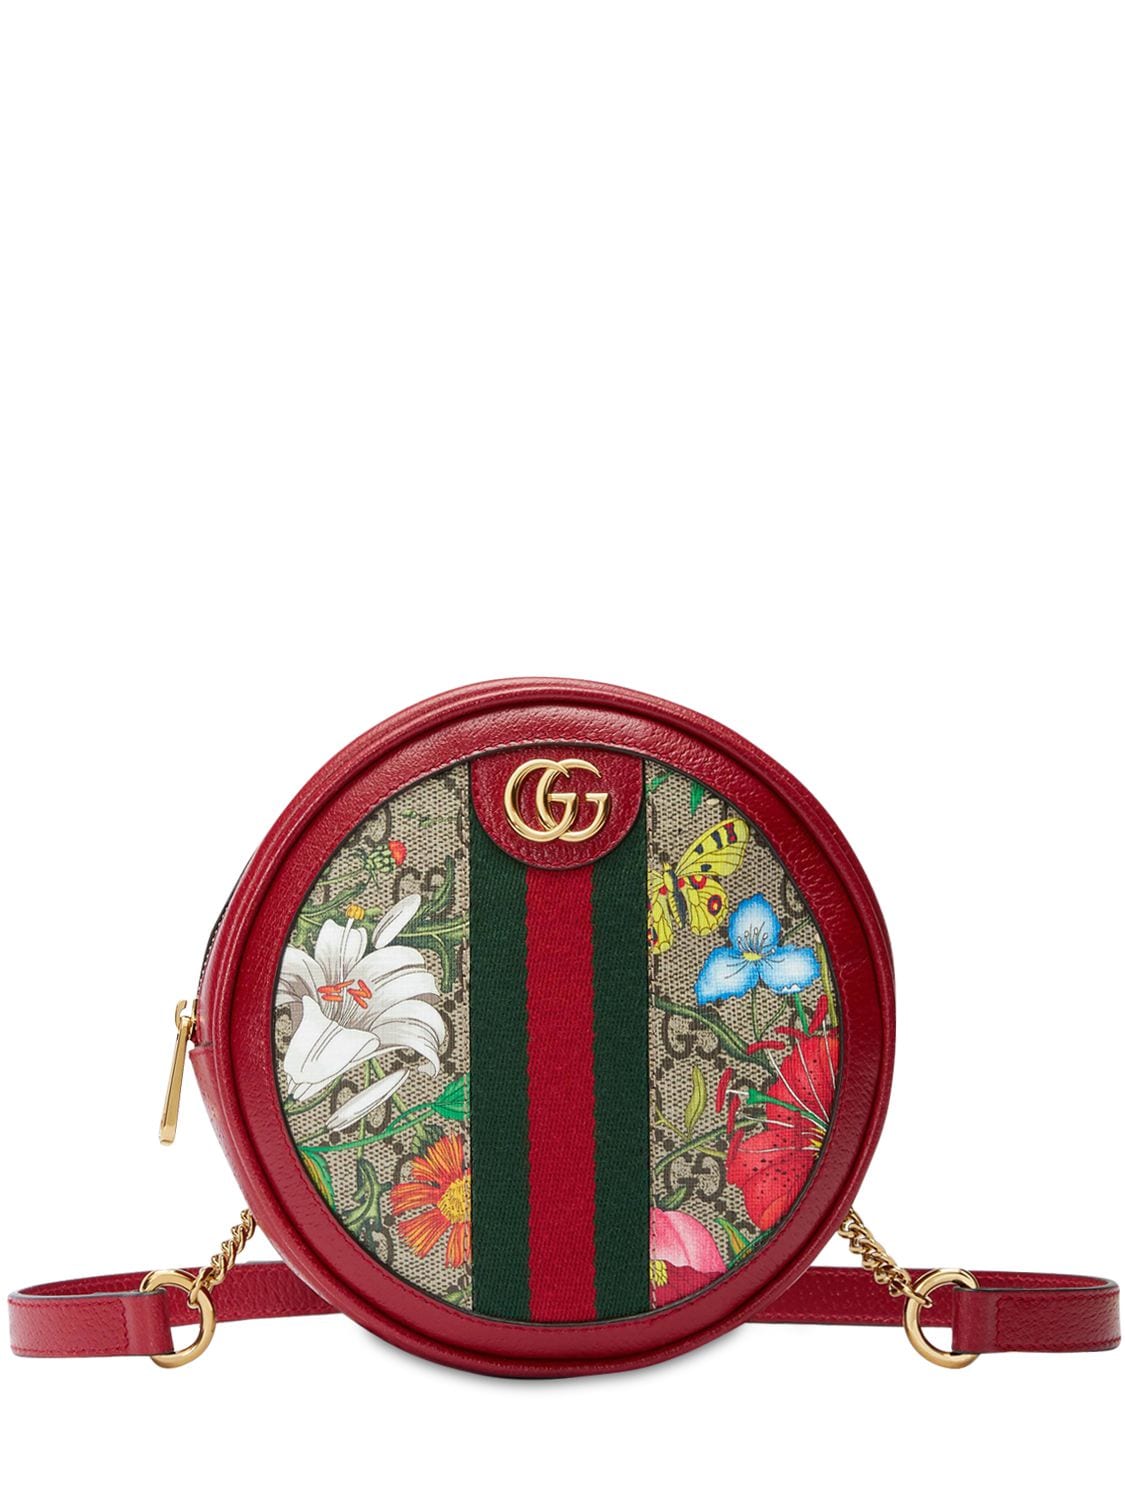 GUCCI OPHIDIA FLORA GG SUPREME ROUND BACKPACK,71IIJS023-ODCYMG2